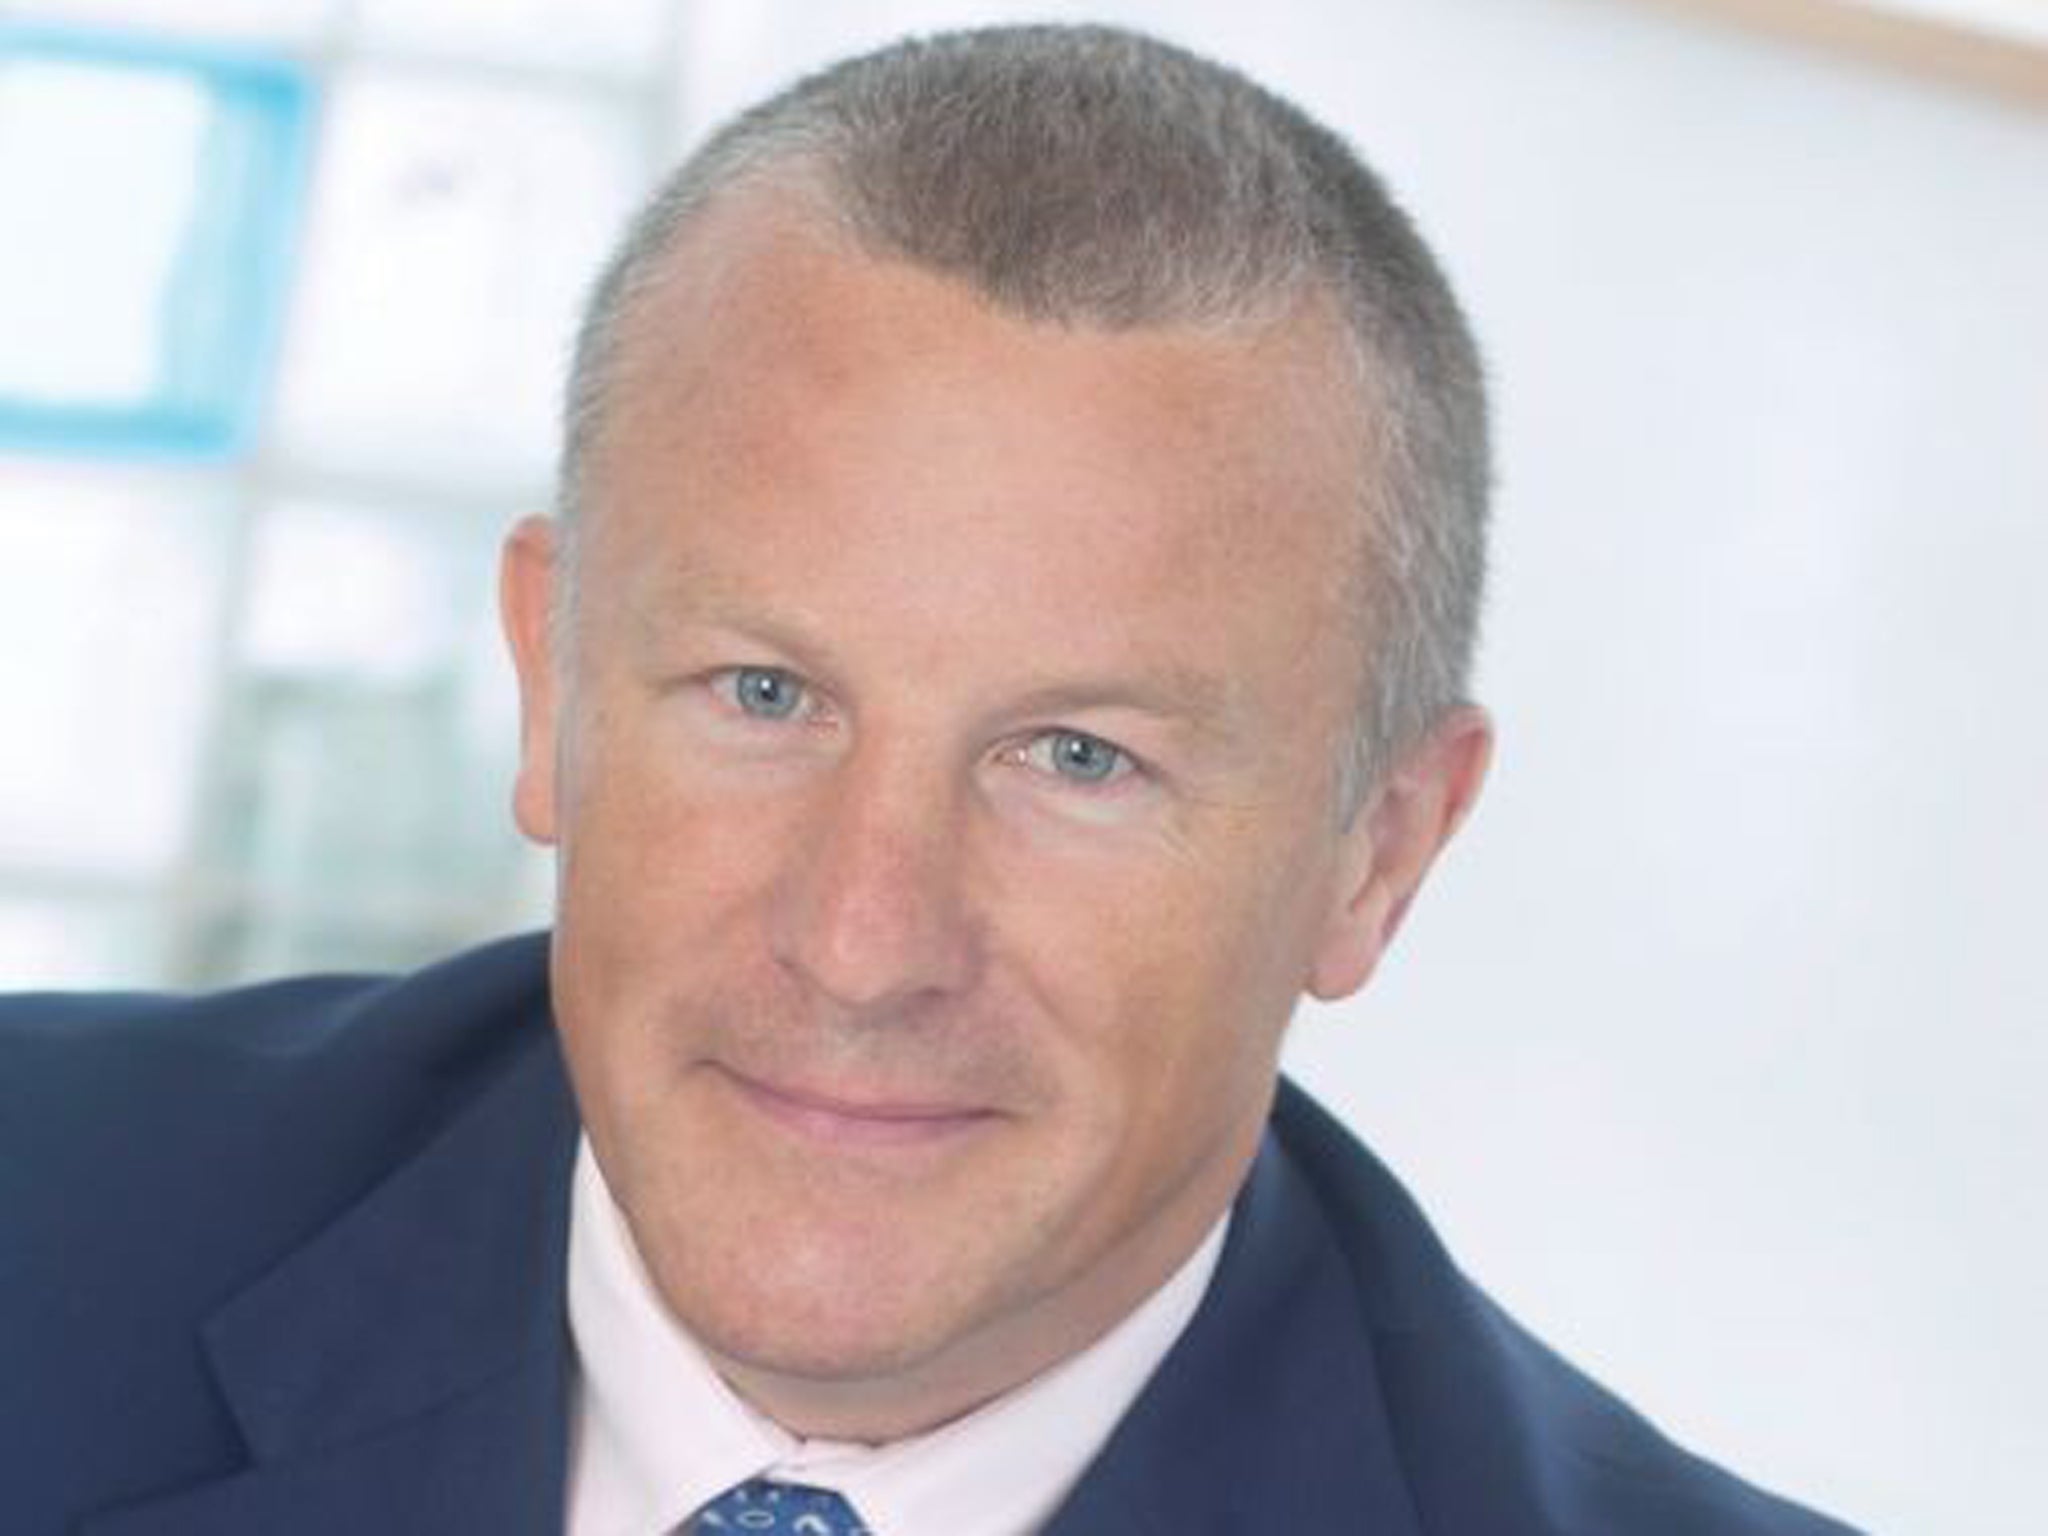 Neil Woodford shocked the City with plans to launch a new fund less than two years after the debacle that left investors with huge losses